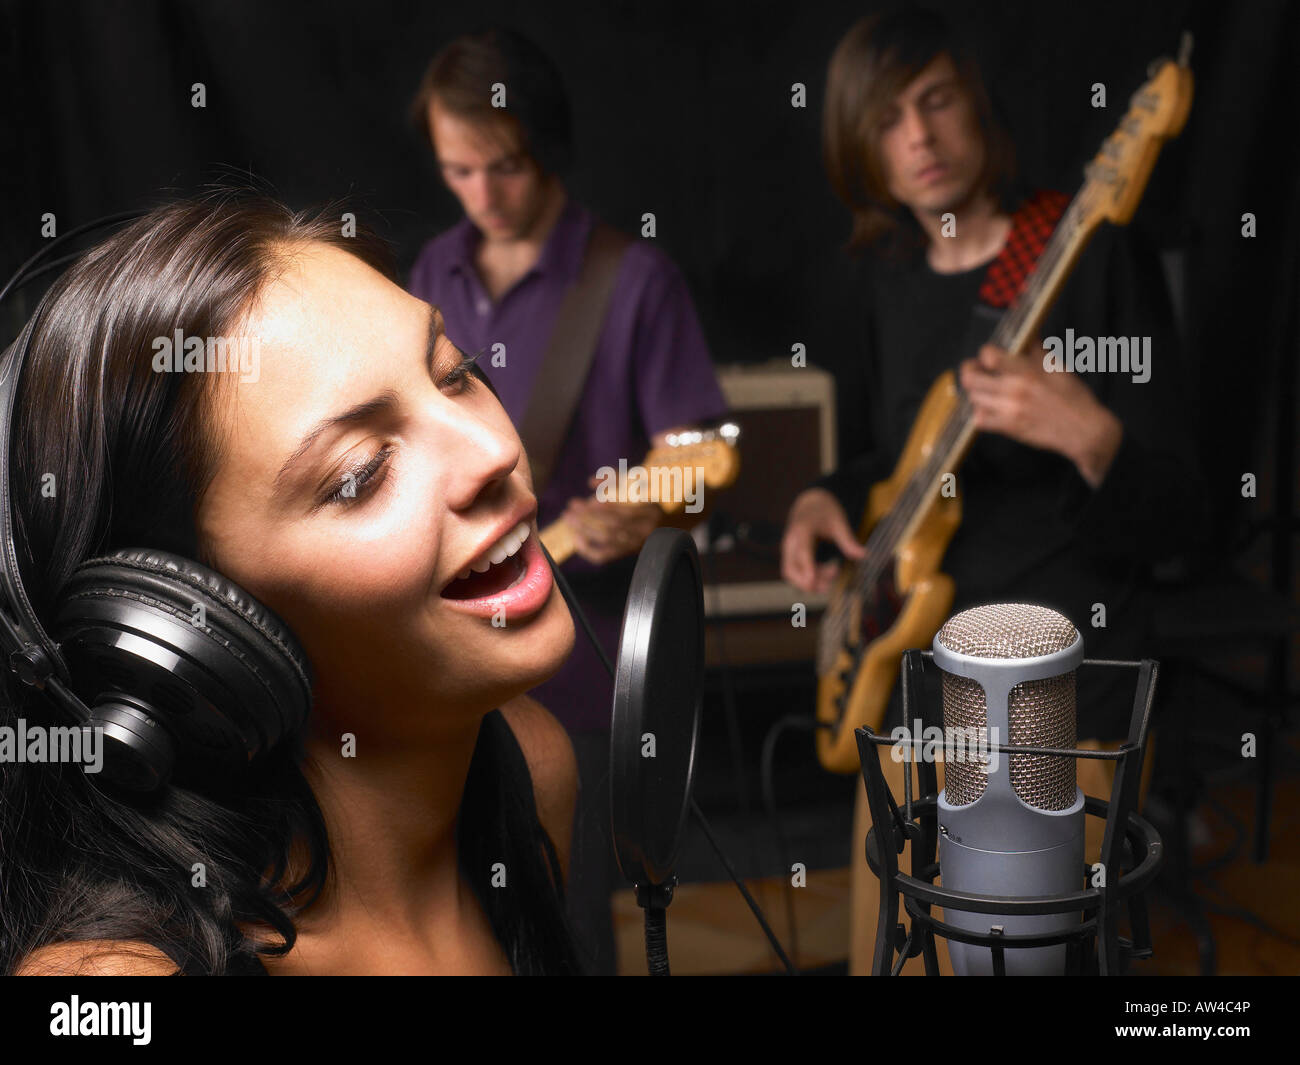 Woman singing in a band. Stock Photo